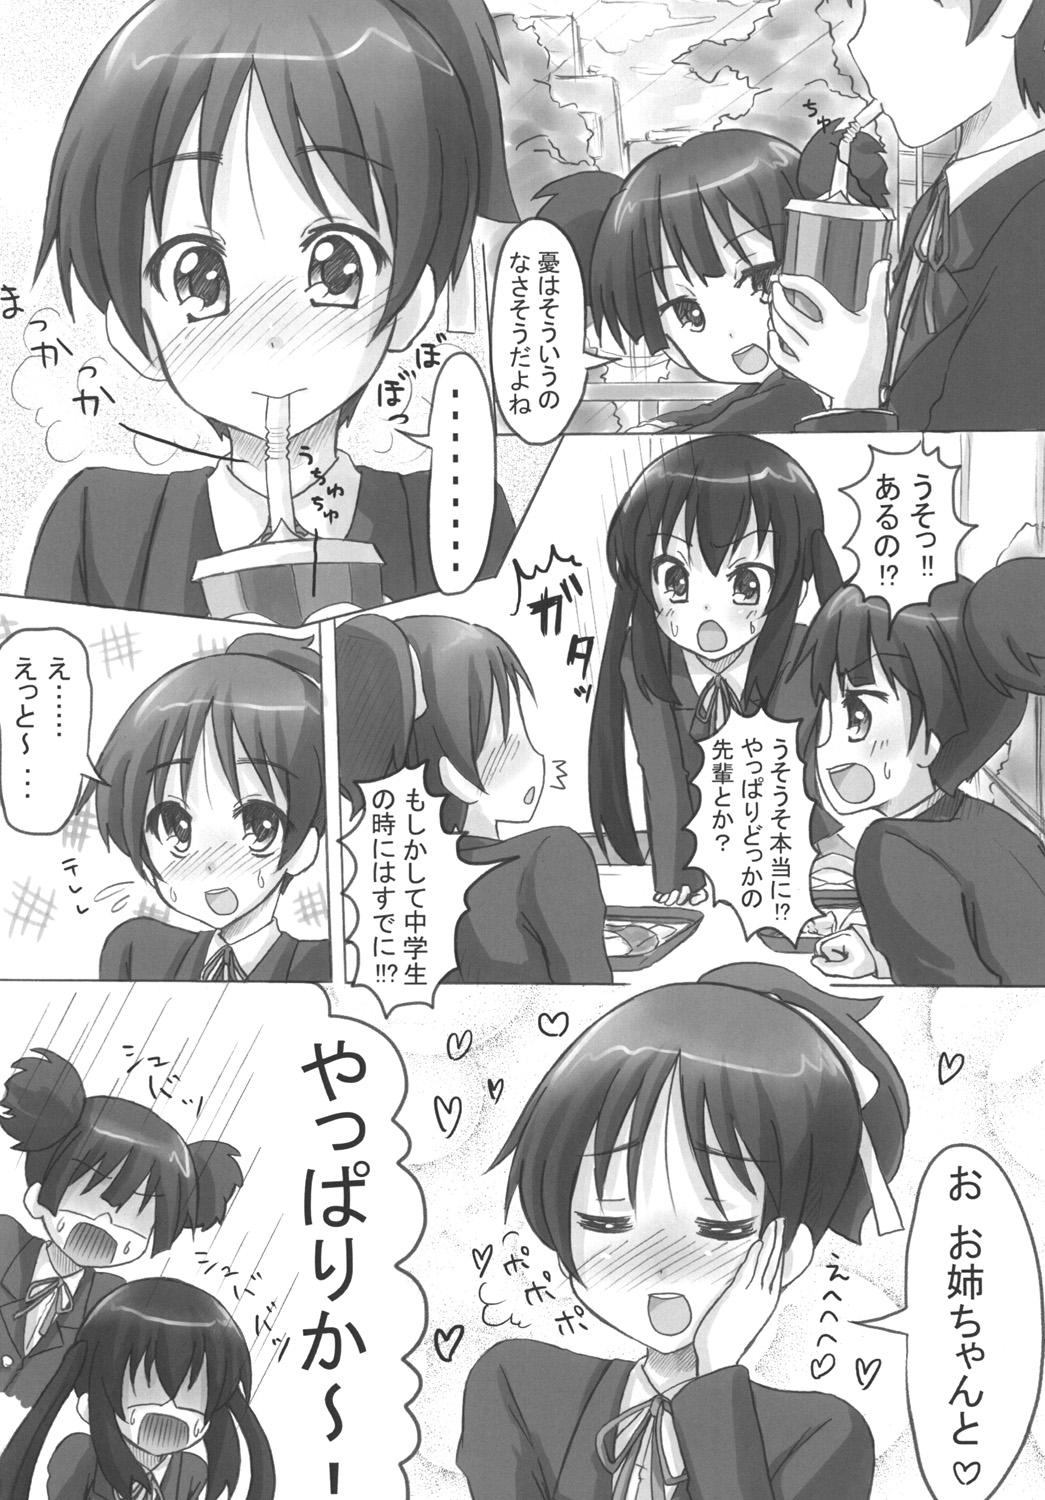 Lezbi Ui-chan LiLy Otome Talk - K-on Transsexual - Page 3